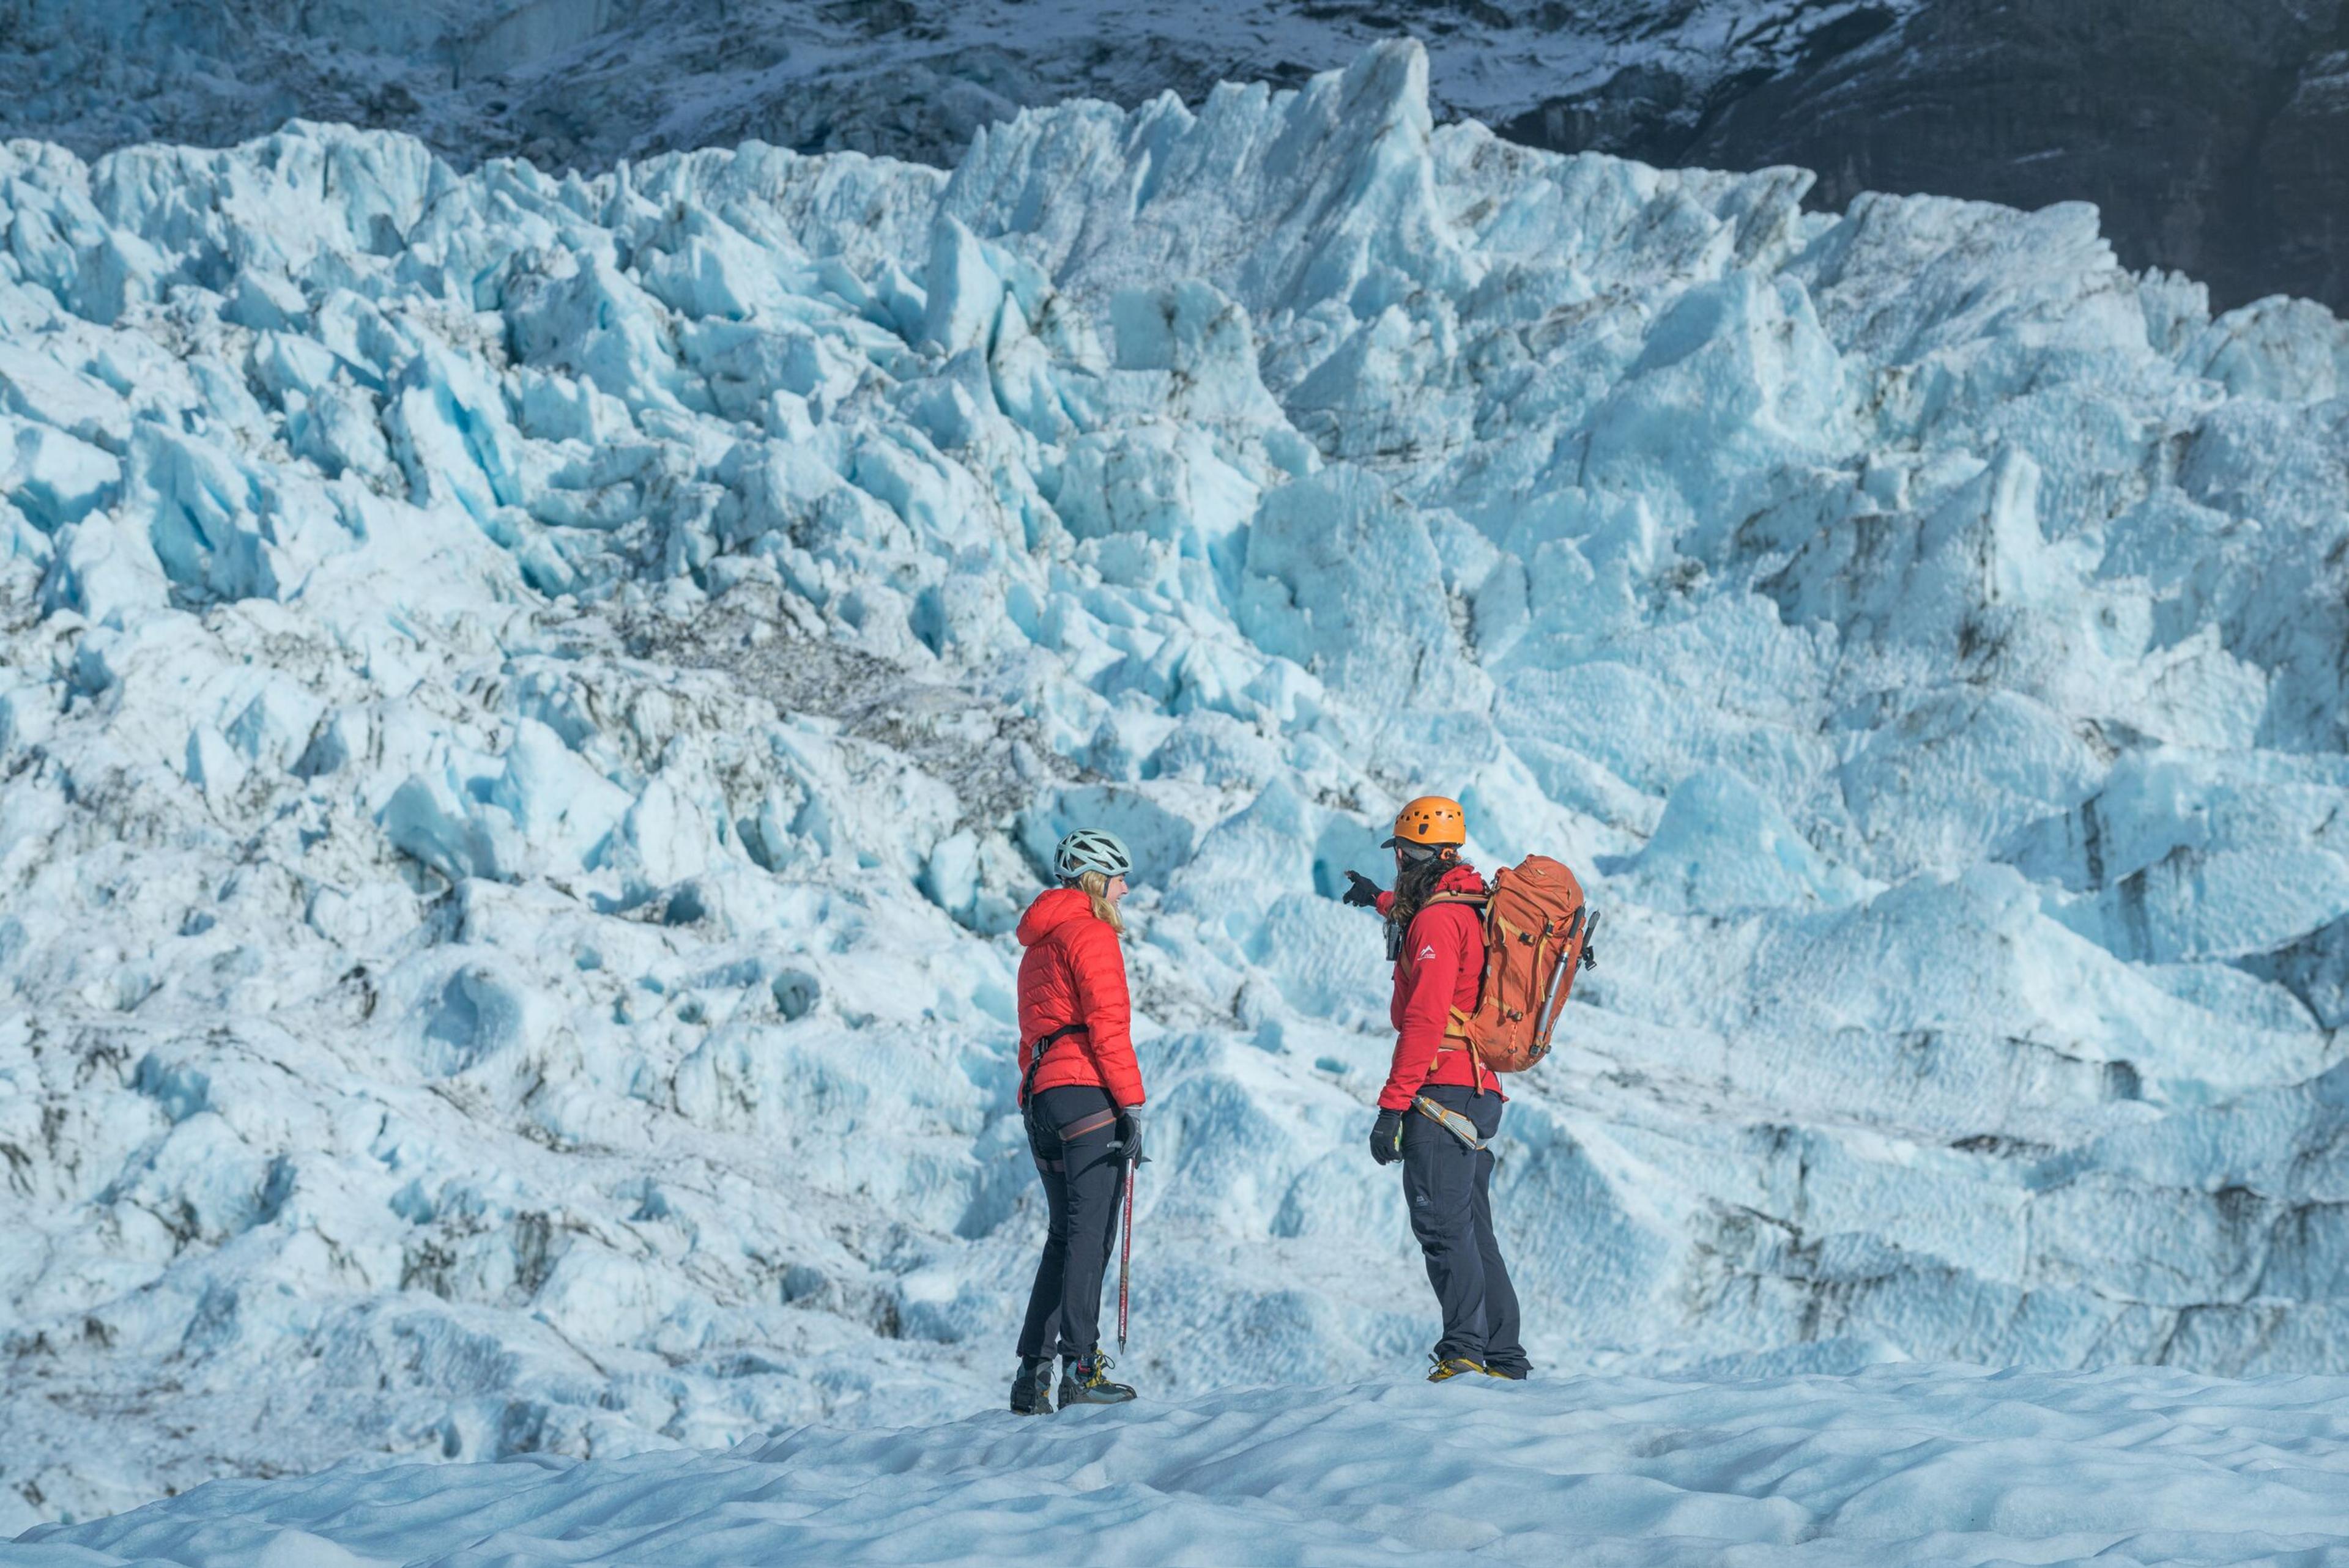 Two adventurers in vibrant red jackets and safety helmets stand atop a brilliant blue glacier, with jagged ice formations providing a dramatic backdrop